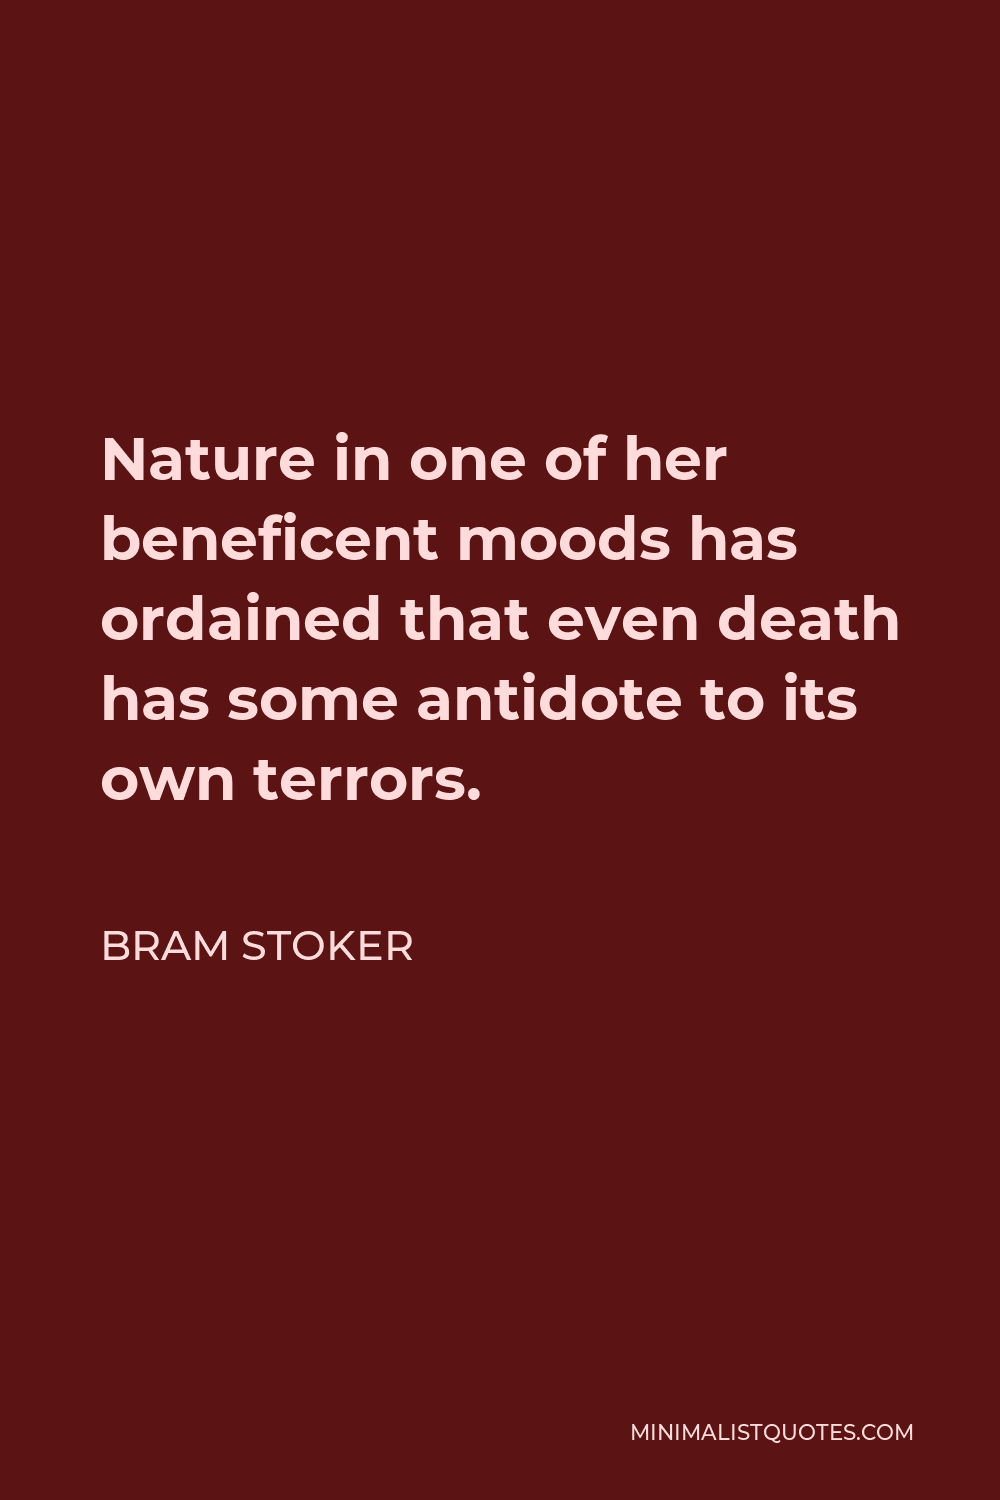 Bram Stoker Quote - Nature in one of her beneficent moods has ordained that even death has some antidote to its own terrors.